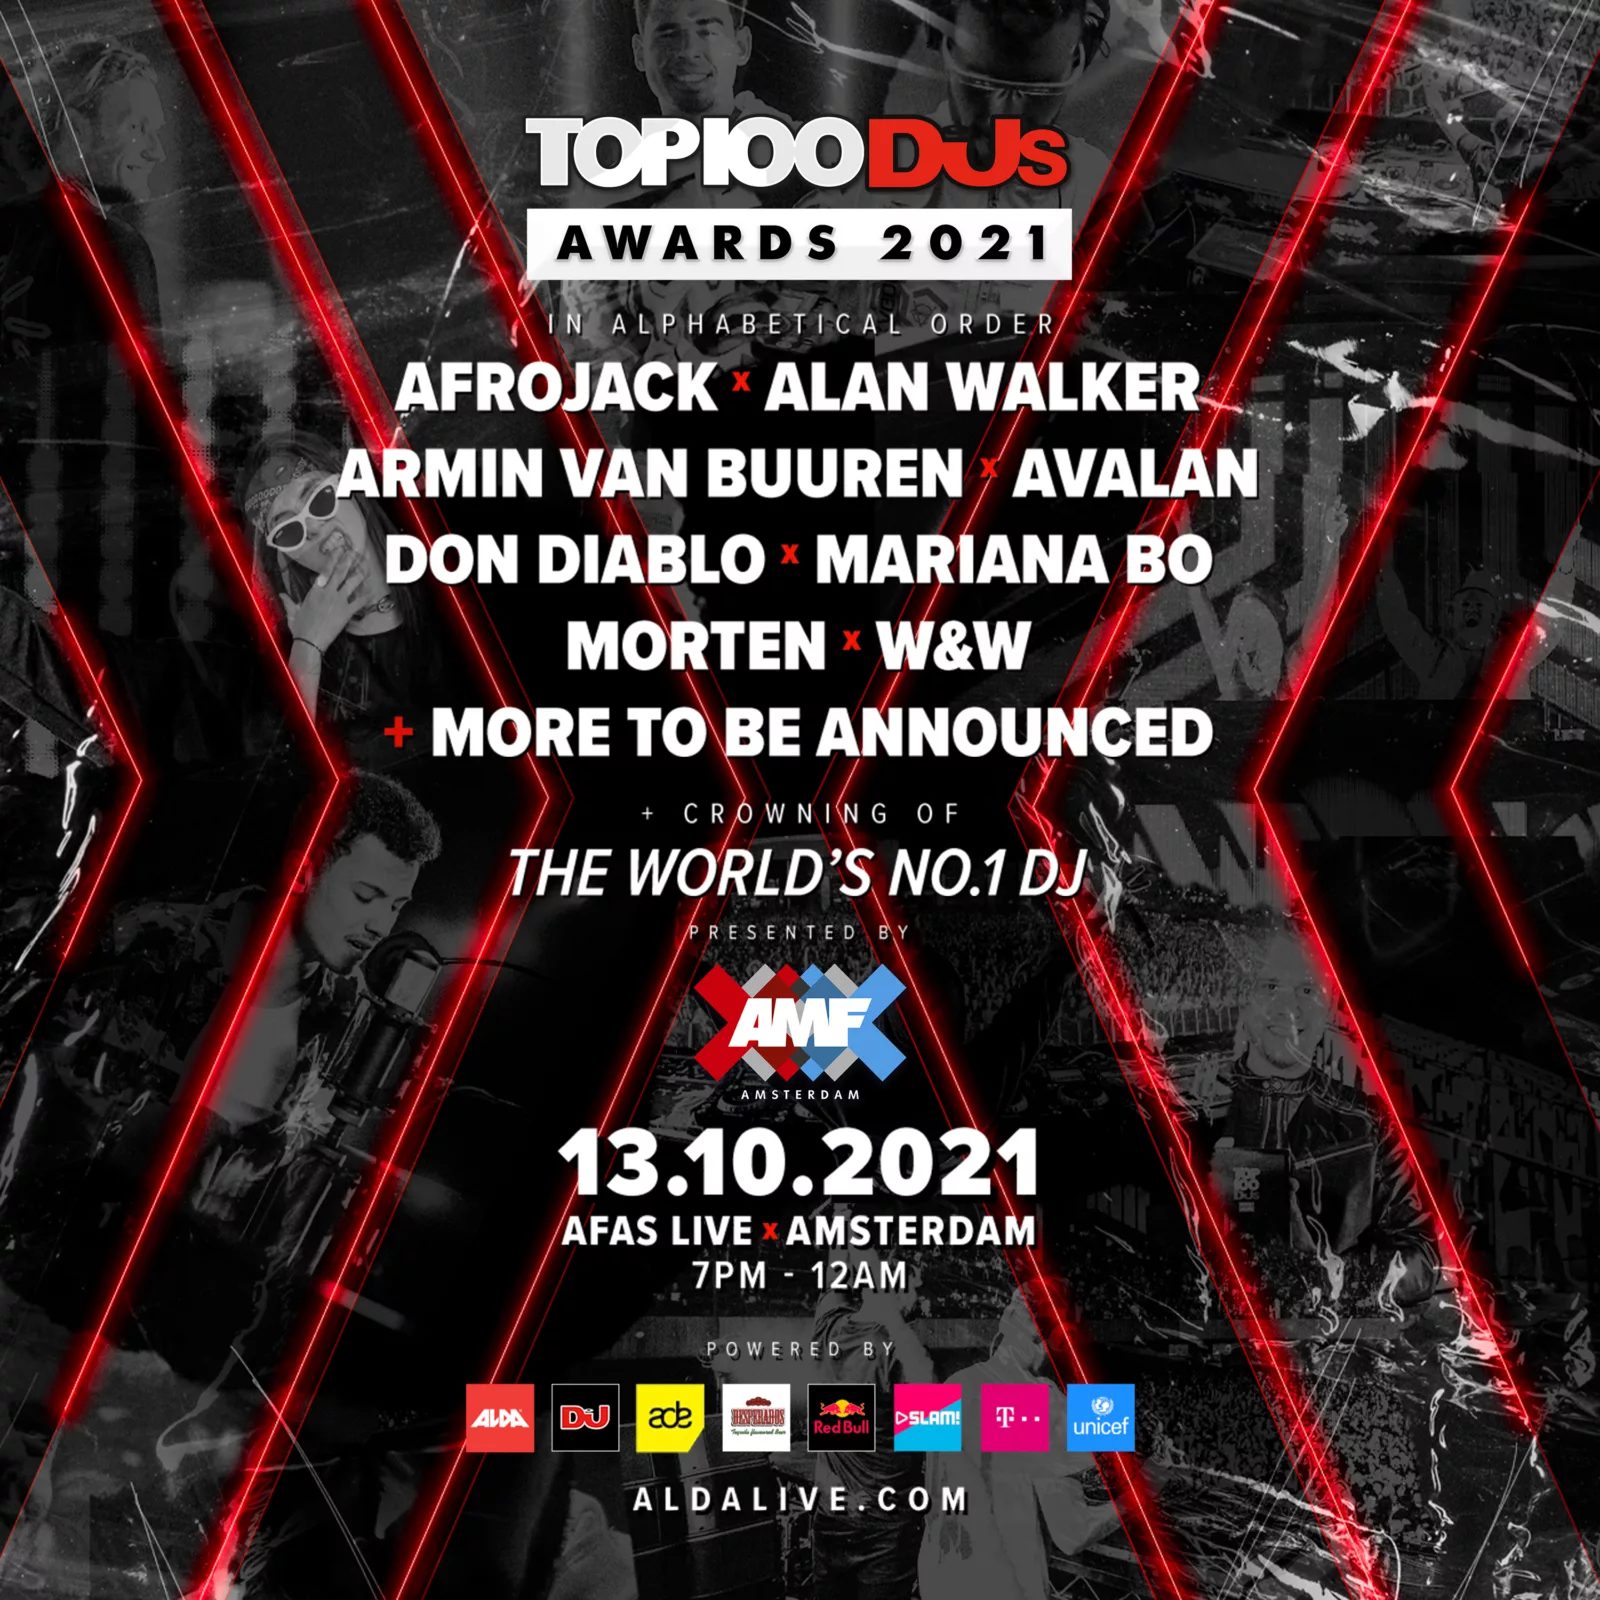 DJ Mag Officially Confirmed Their Top 100 Awards Show For - Maniac